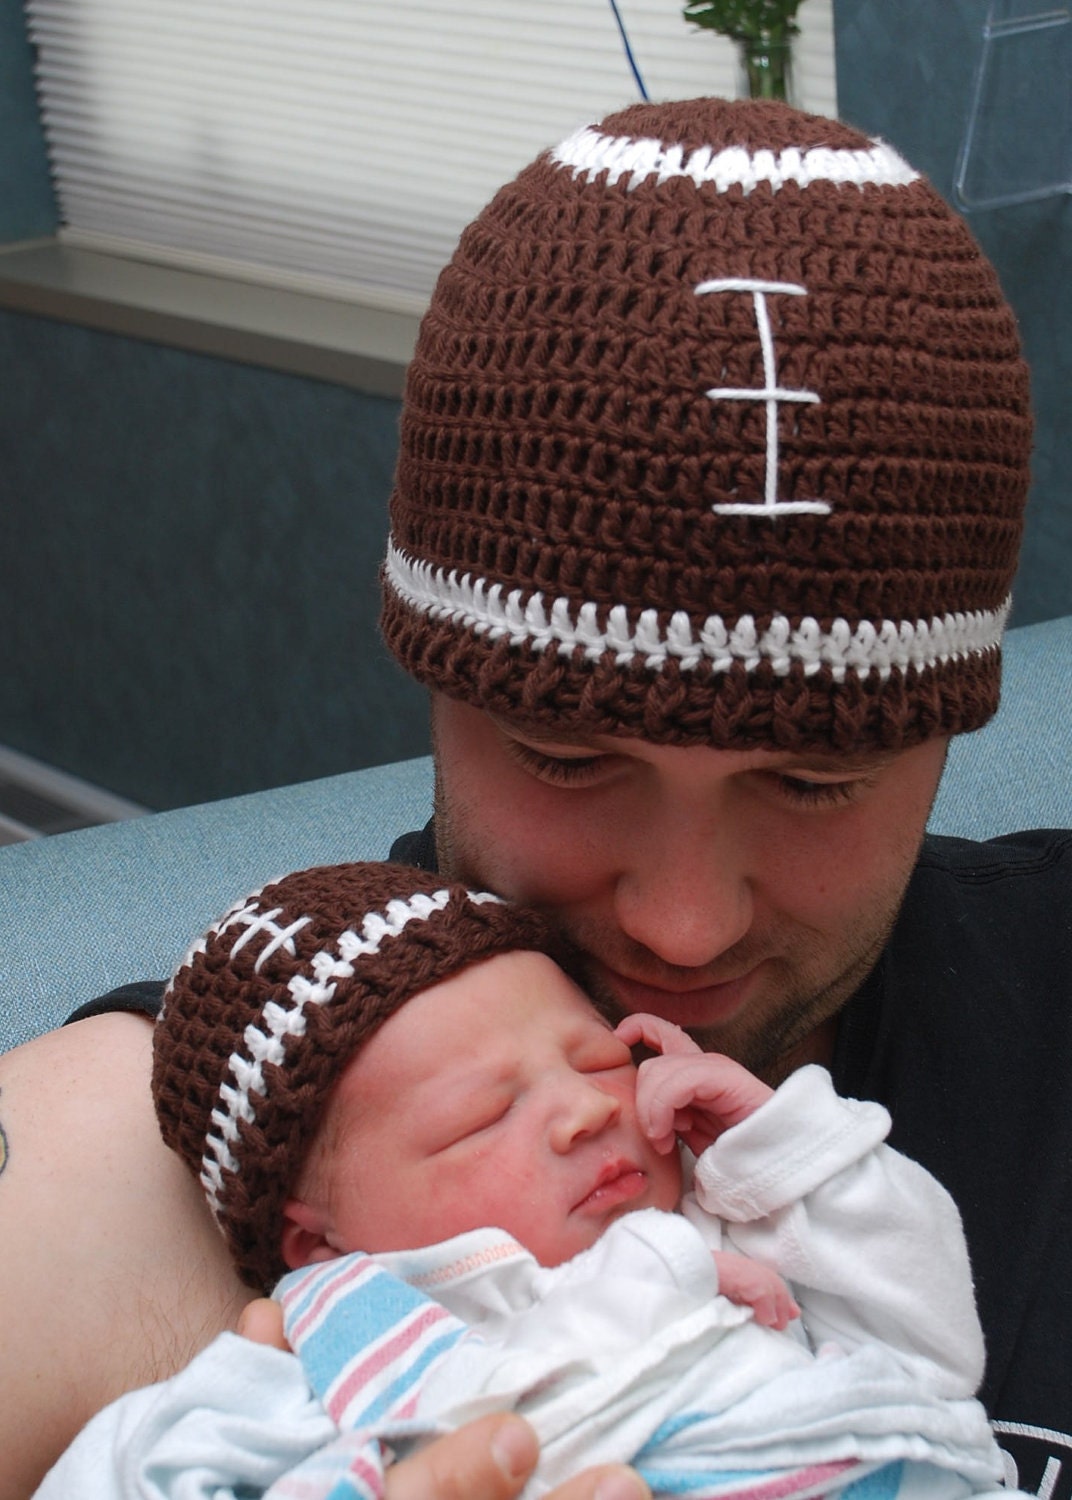 Father Son set  Crochet football Hat beanie Size newborn  adult  classic colors or choose team colors